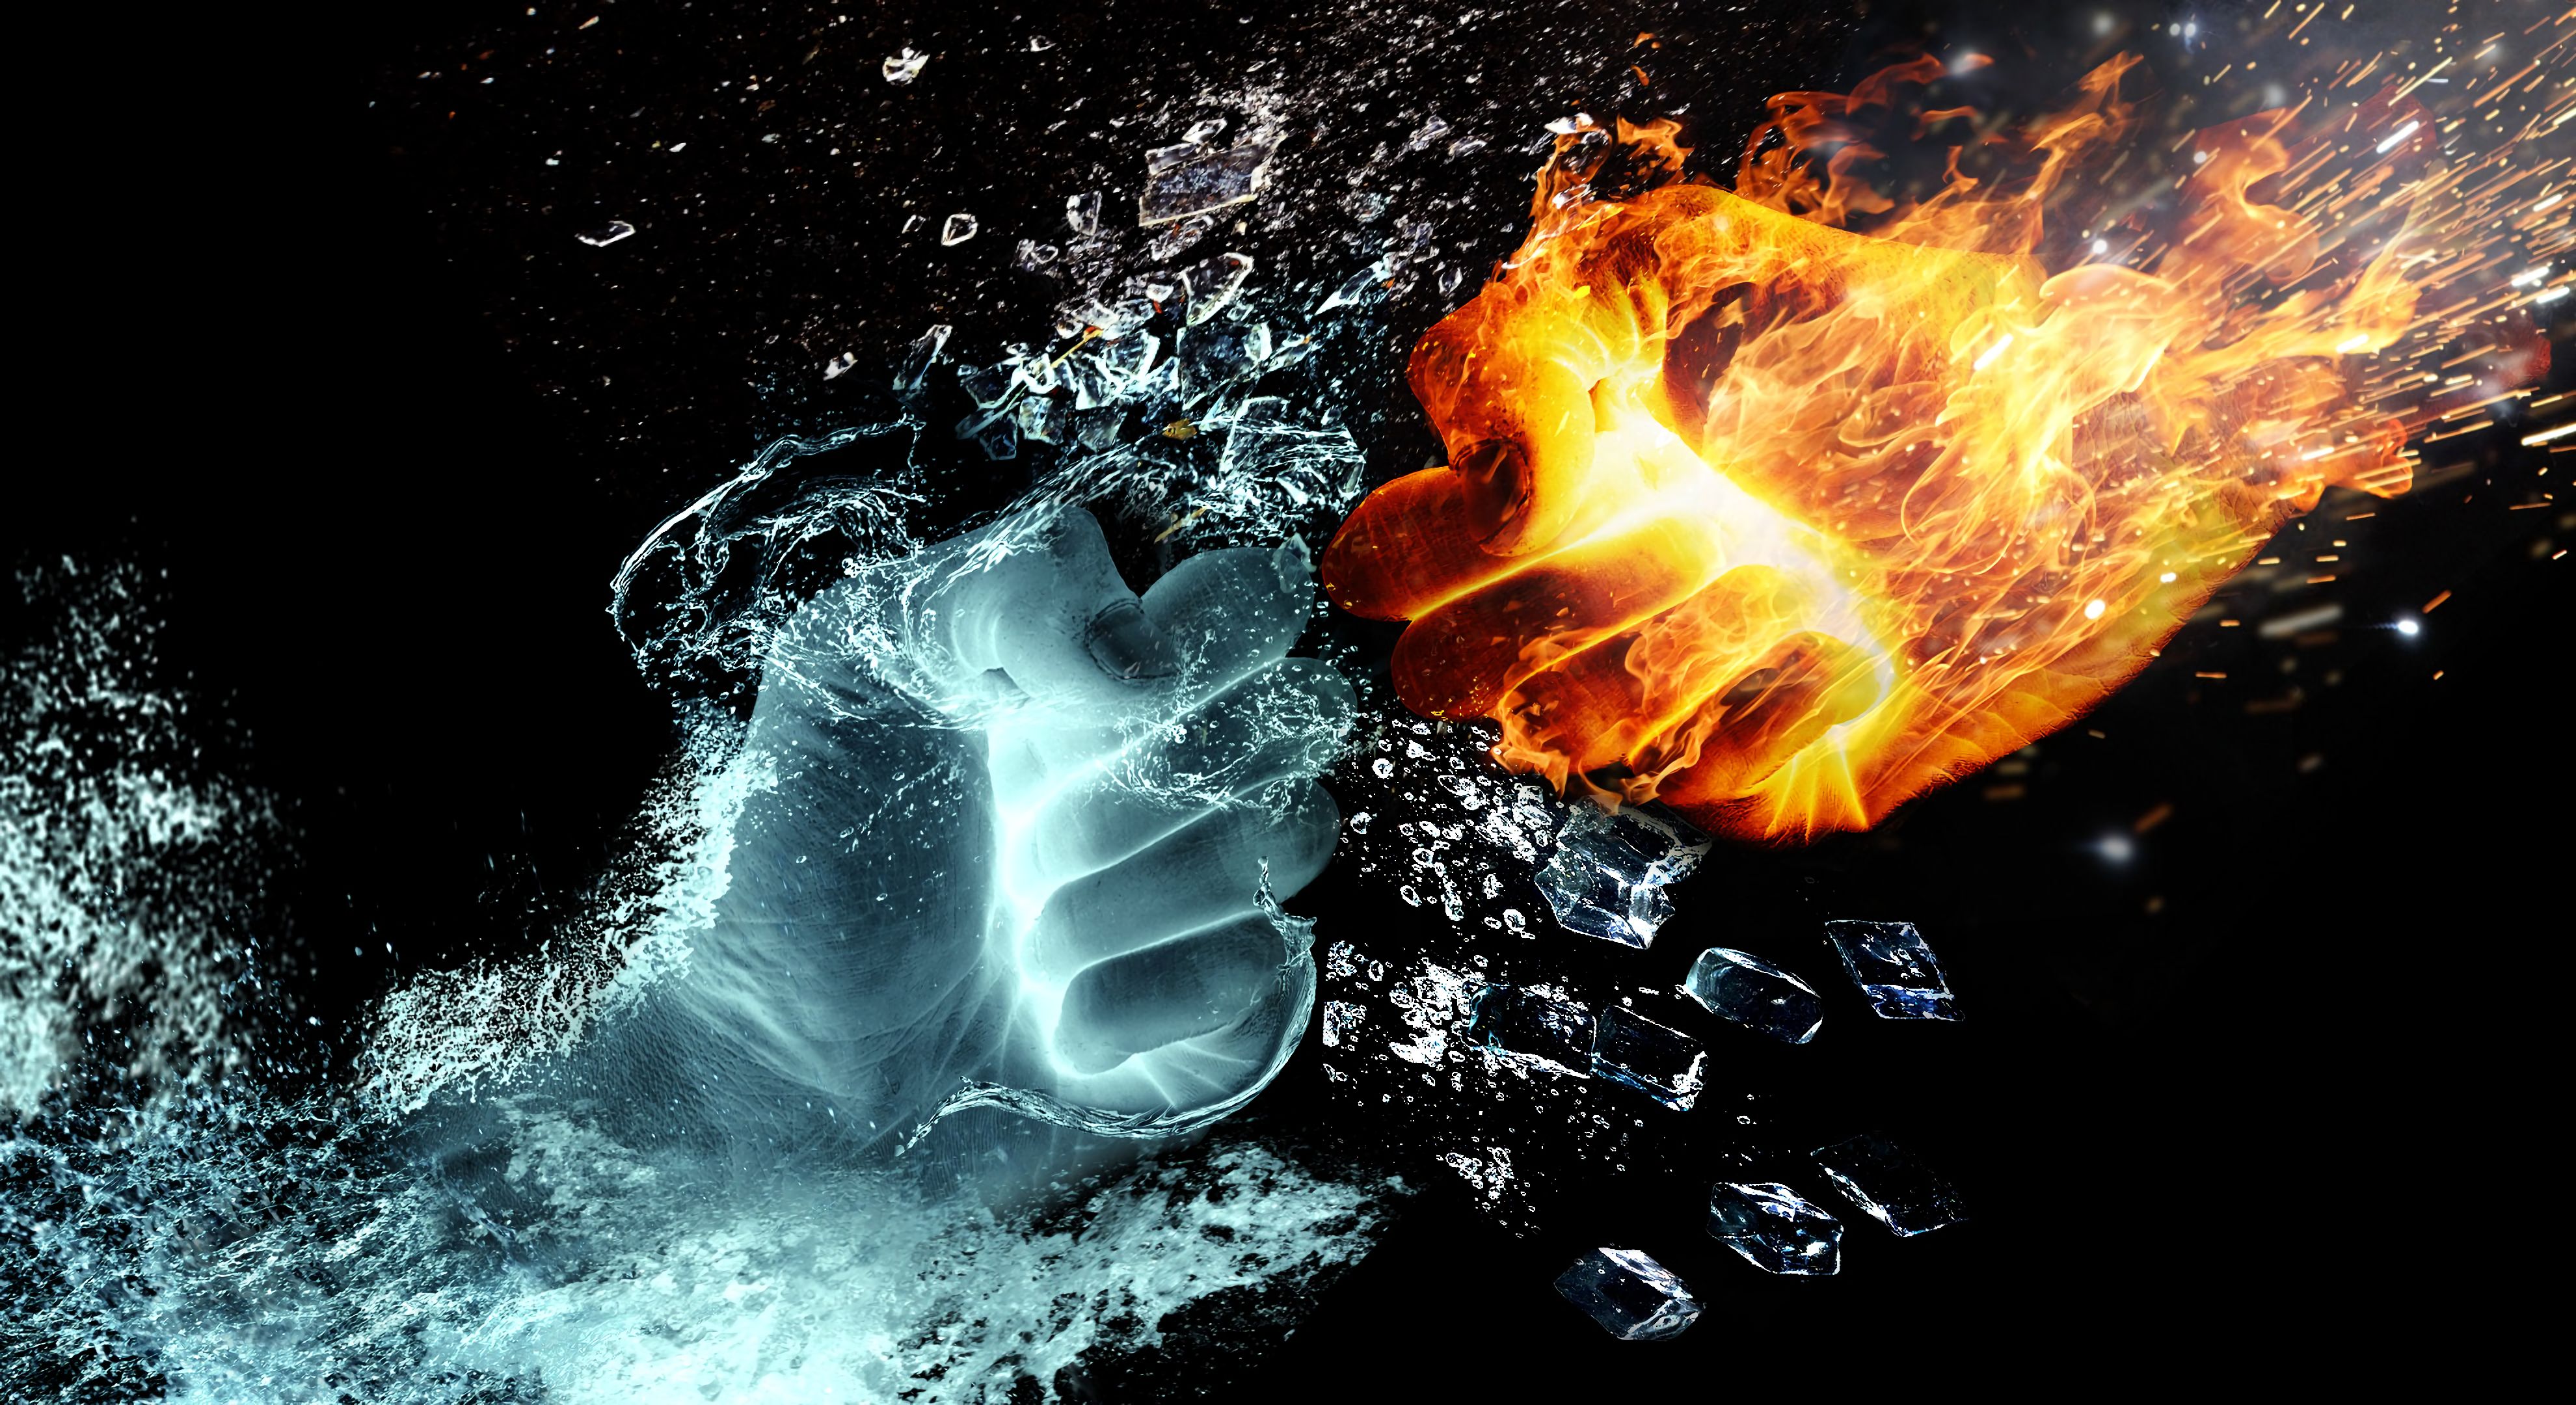 hands, fire, water, miscellanea, miscellaneous, spray, shards, smithereens